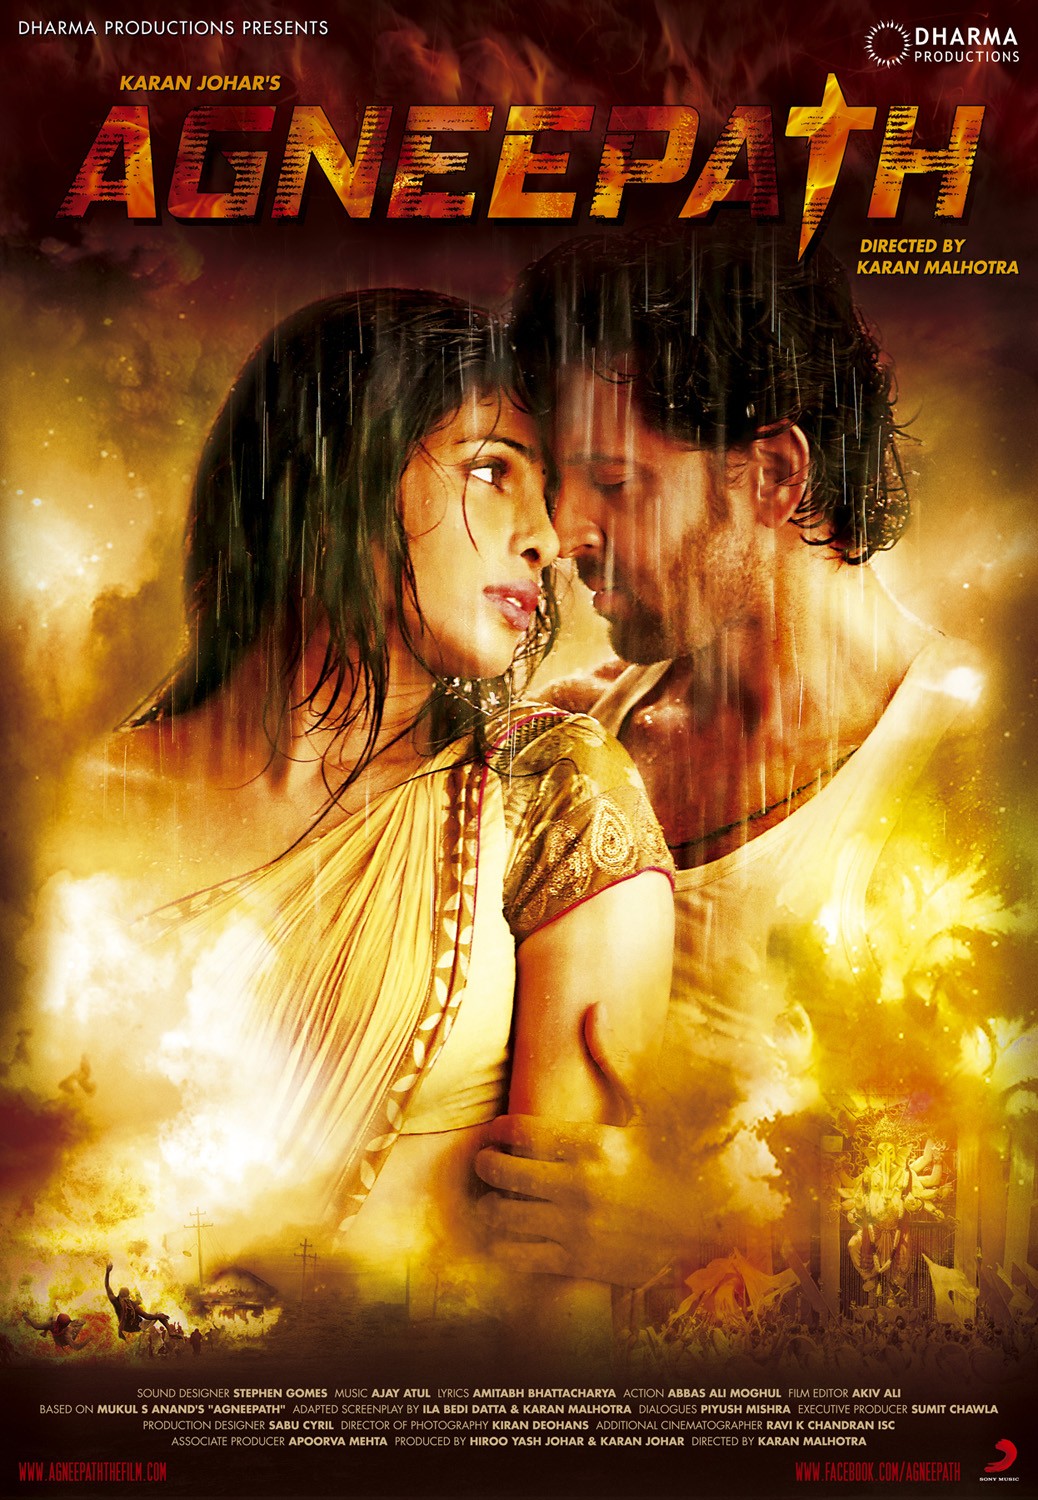 Extra Large Movie Poster Image for Agneepath (#1 of 6)